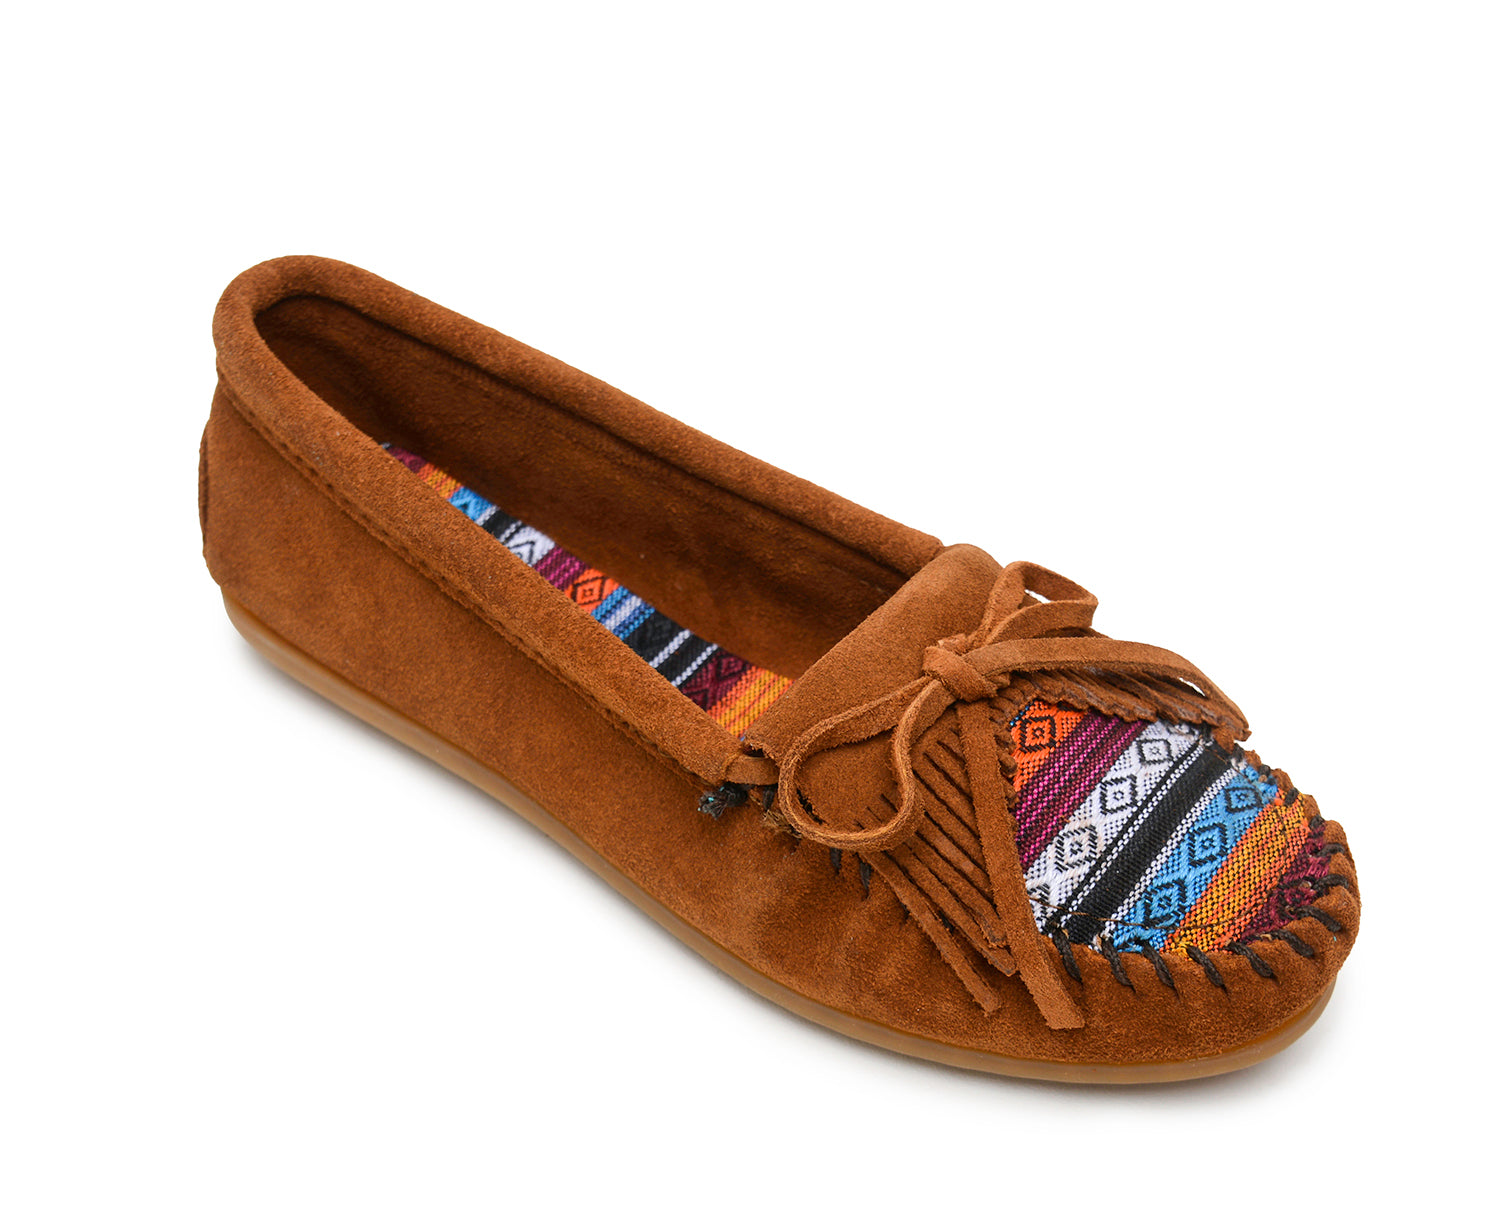 Kilty Hardsole Moccasin in Arizona Fabric from 3/4 Angle View